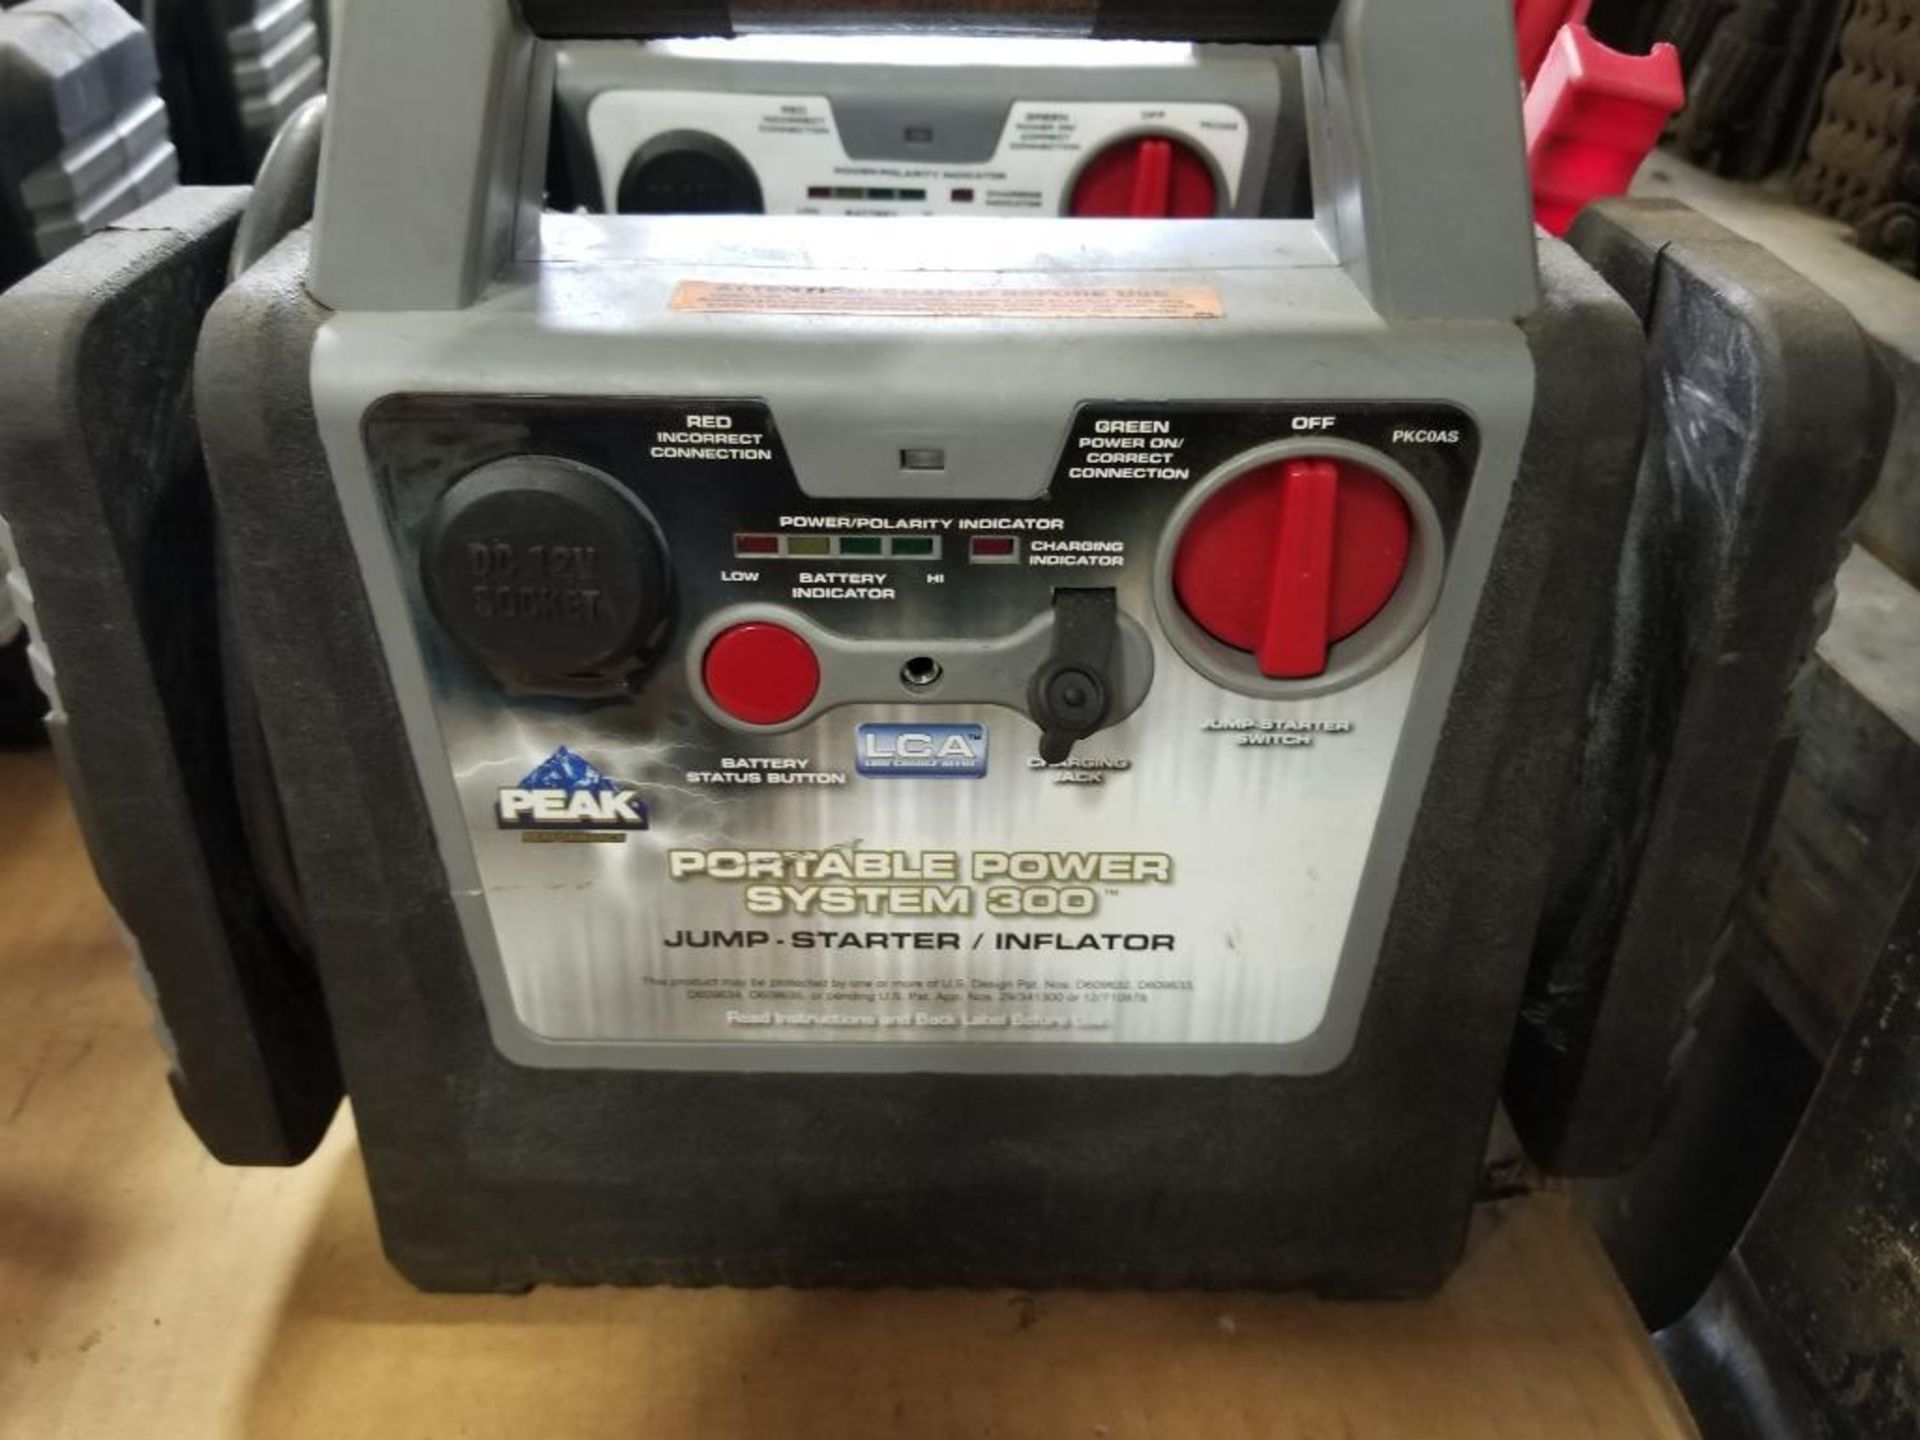 Qty 3 - Assorted Peak Performance Power station jump-starter / inflator. - Image 3 of 6